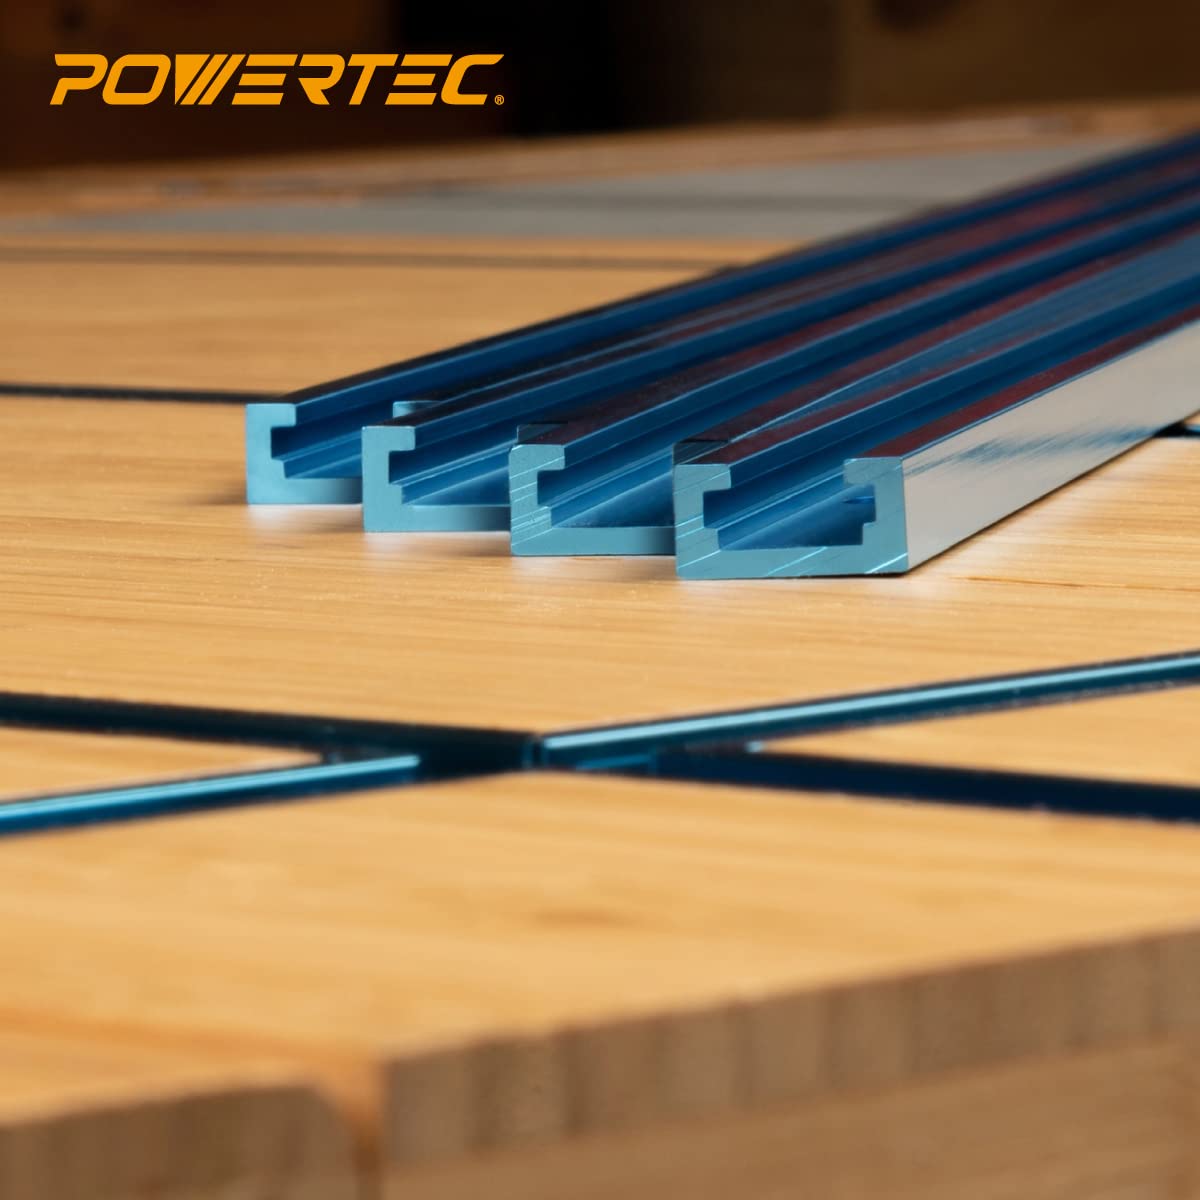 POWERTEC 71371 24 Inch Double-Cut Profile Universal T-Track with Predrilled Mounting Holes, 4 PK, T Track for Woodworking Jigs and Fixtures, Drill Press Table, Router Table, Workbench